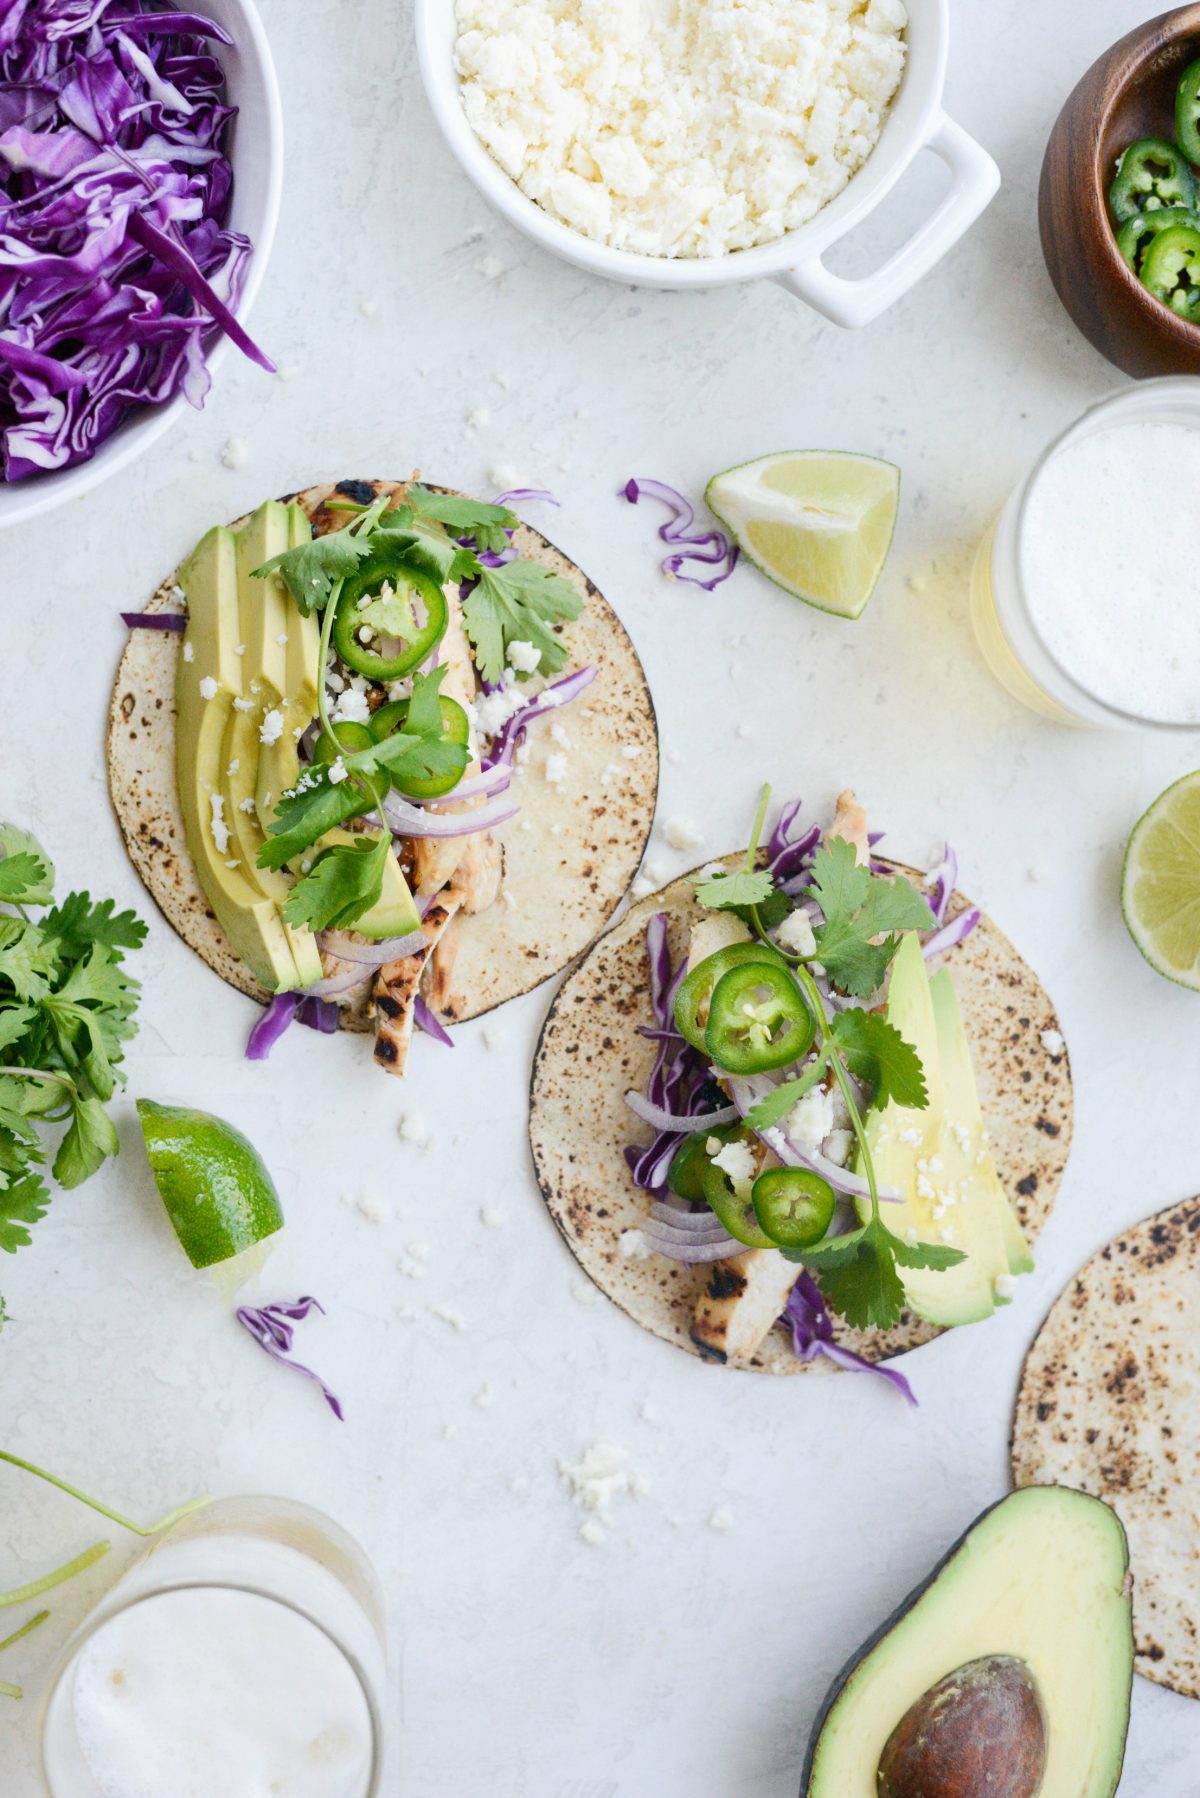 Grilled Tequila Lime Chicken Tacos